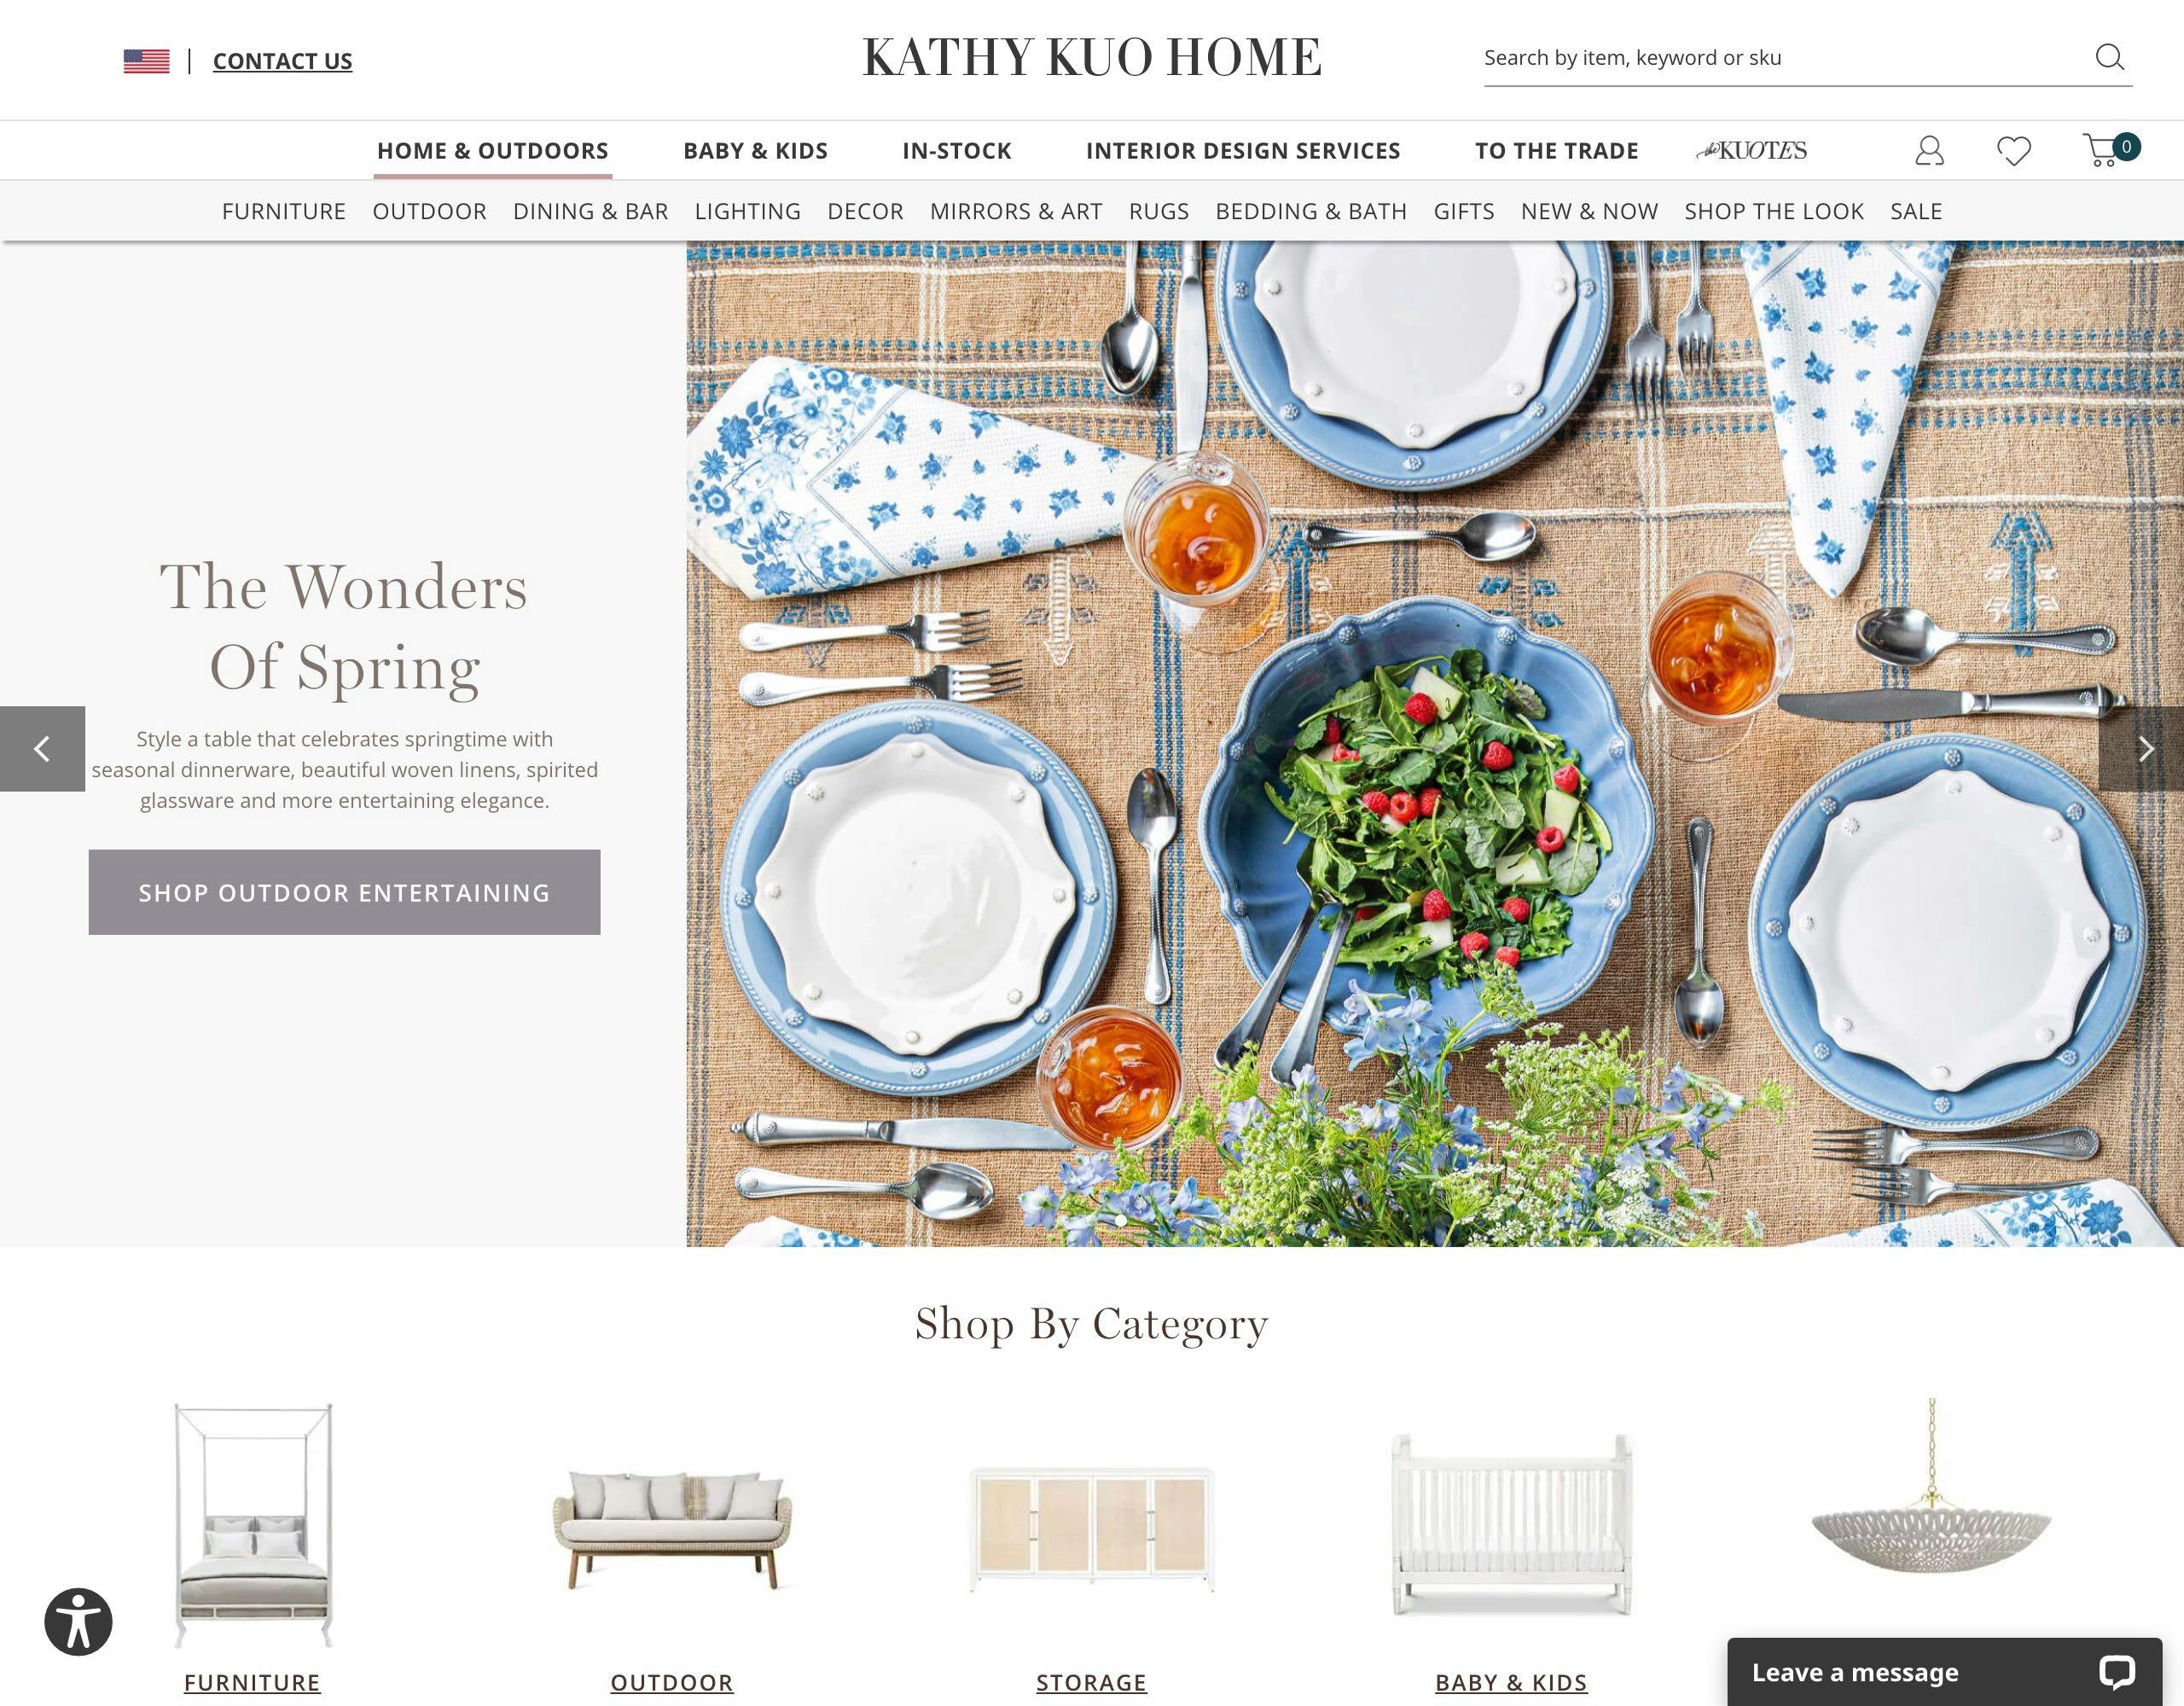 Kathy Kuo Home website